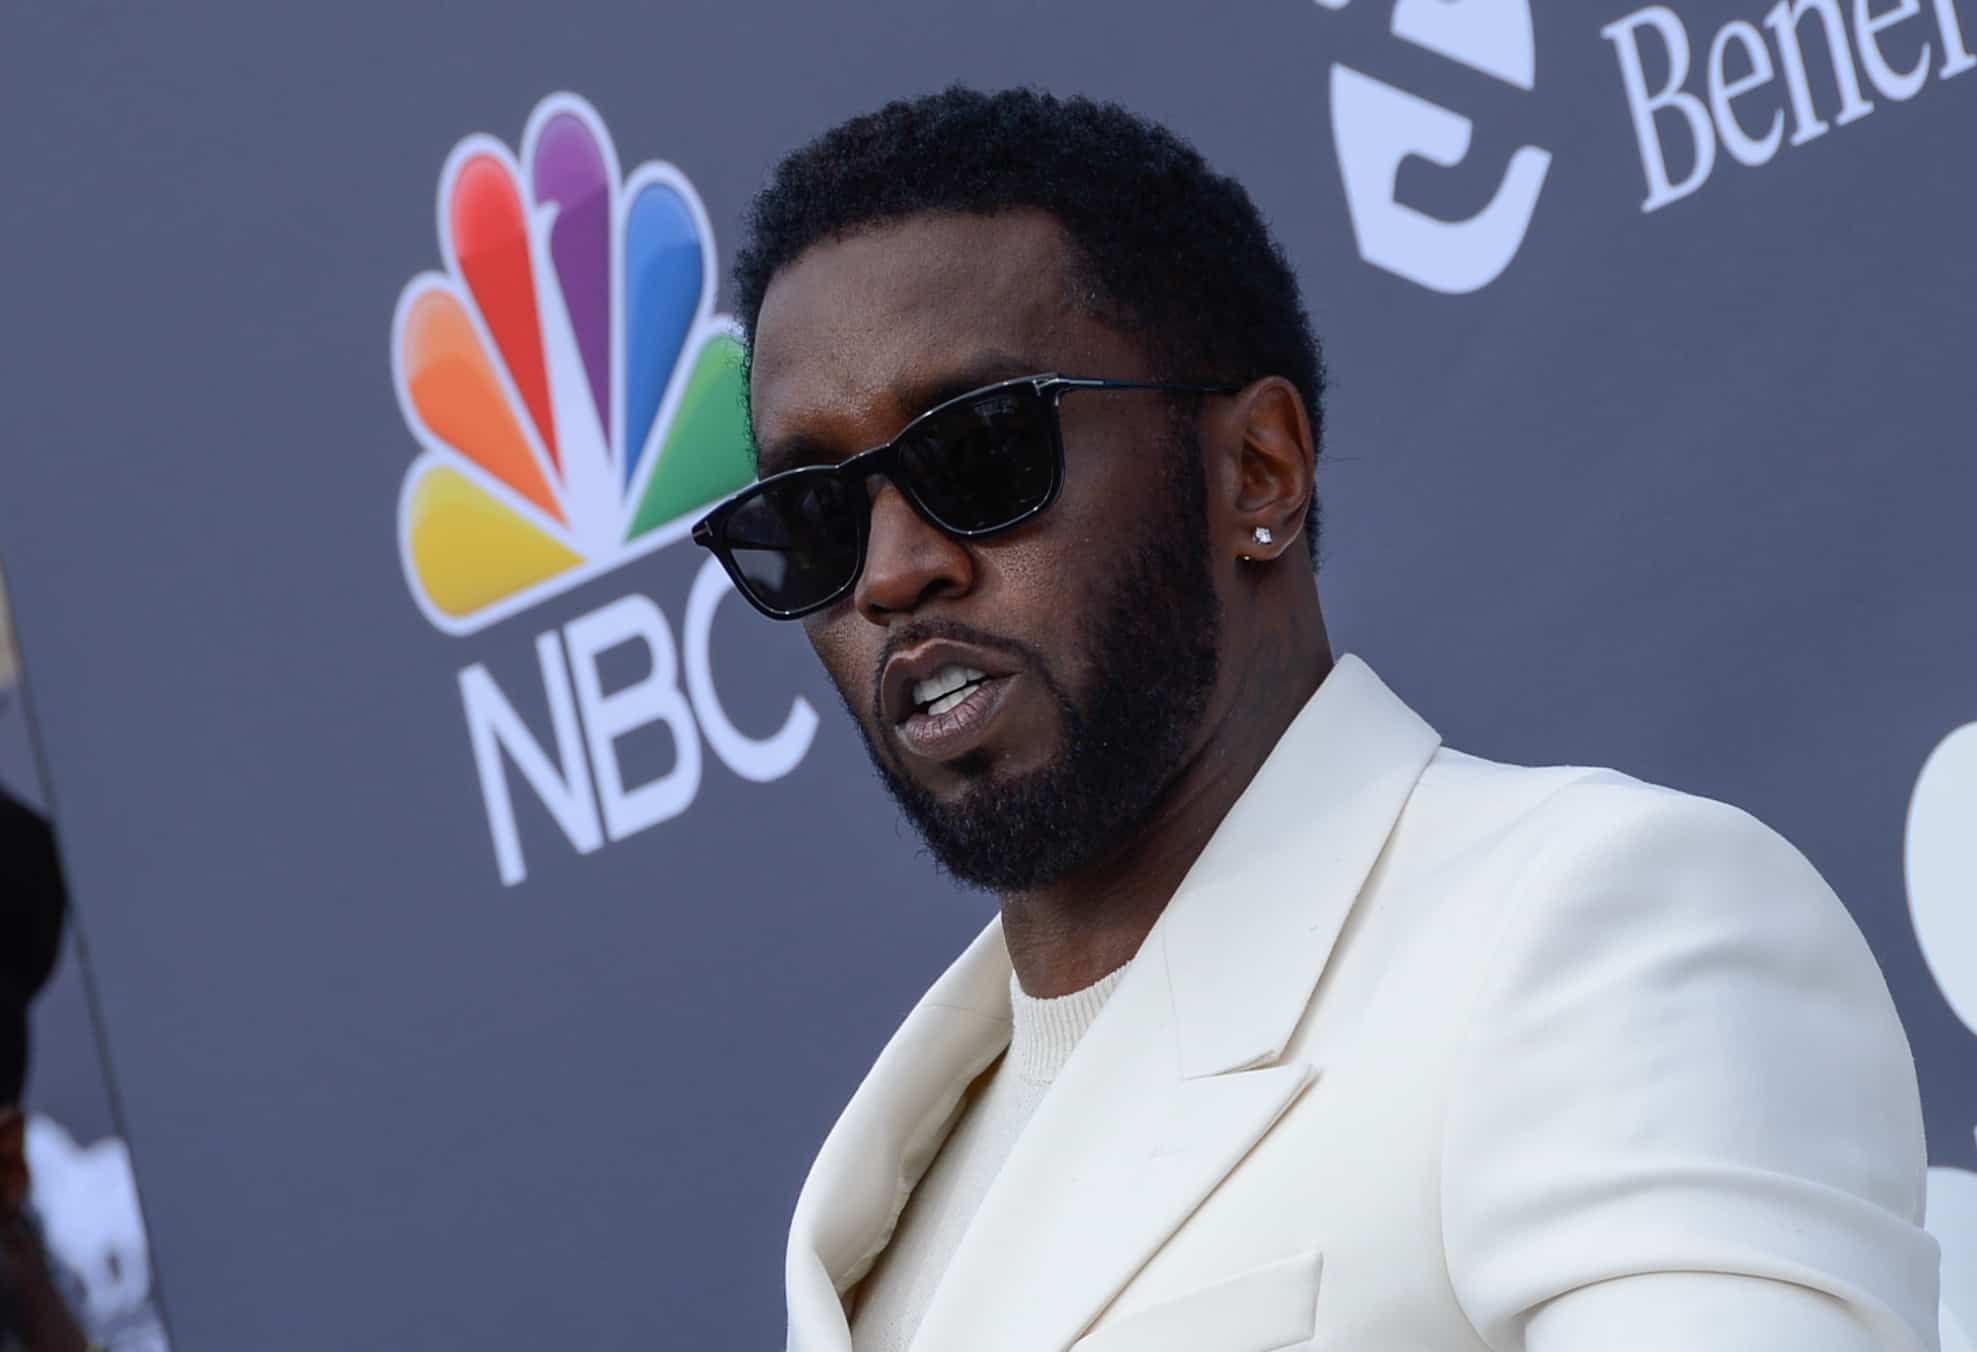 NYPD Releases Statement About False Diddy Criminal Investigation